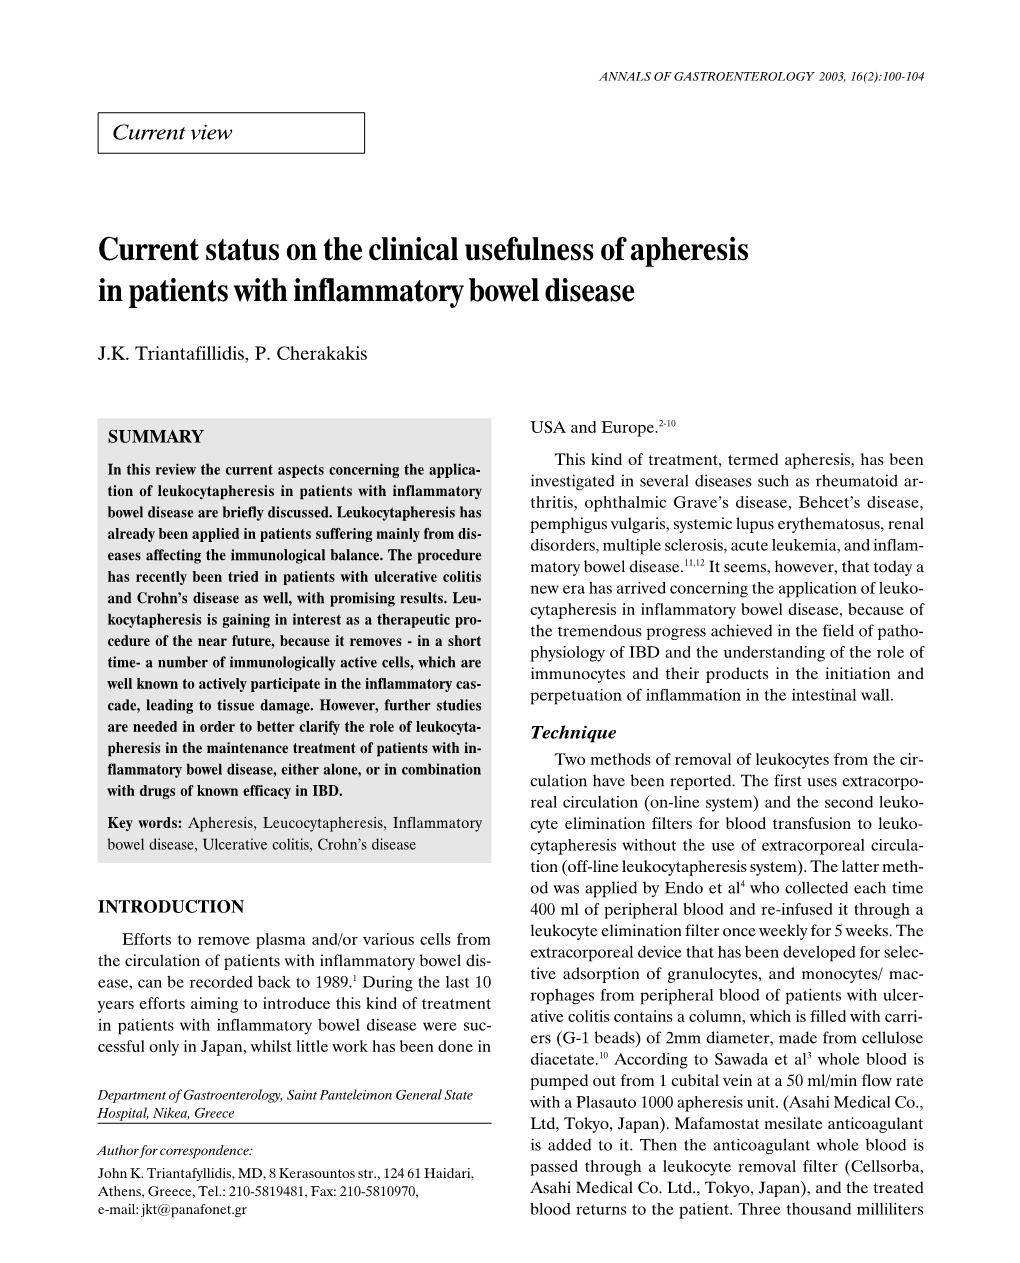 Current Status on the Clinical Usefulness of Apheresis in Patients with Inflammatory Bowel Disease